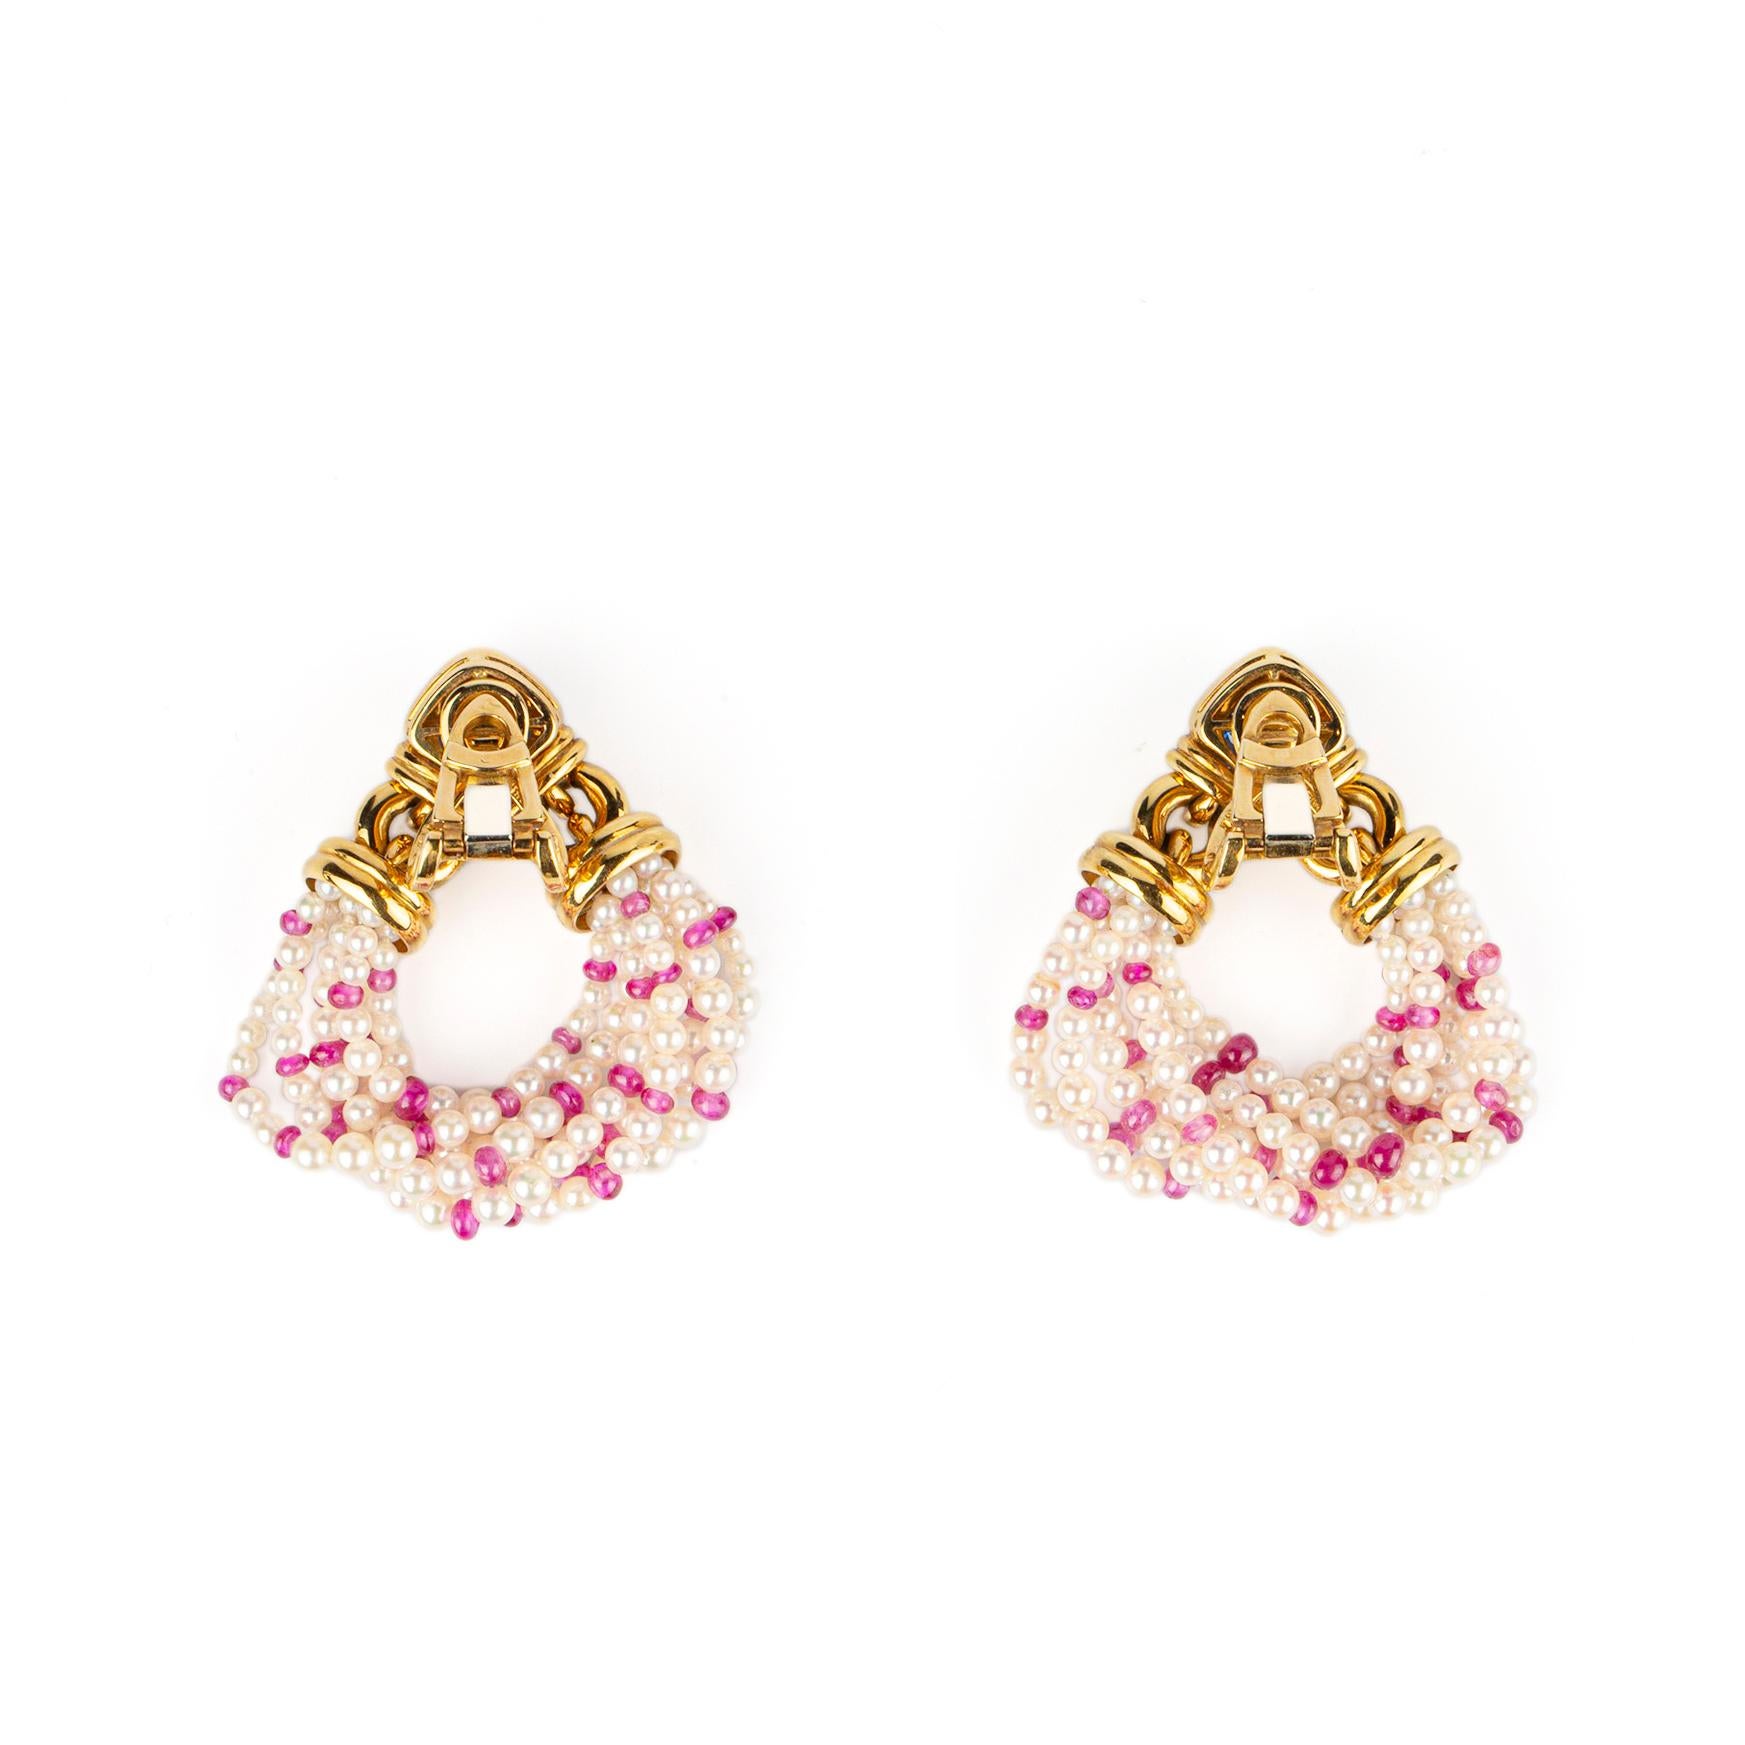 Bulgari 18k Yellow Gold, Pearl, Pink Sapphire, and Sugarloaf Sapphire Ear-Pendants. Made in Italy, circa 1980.